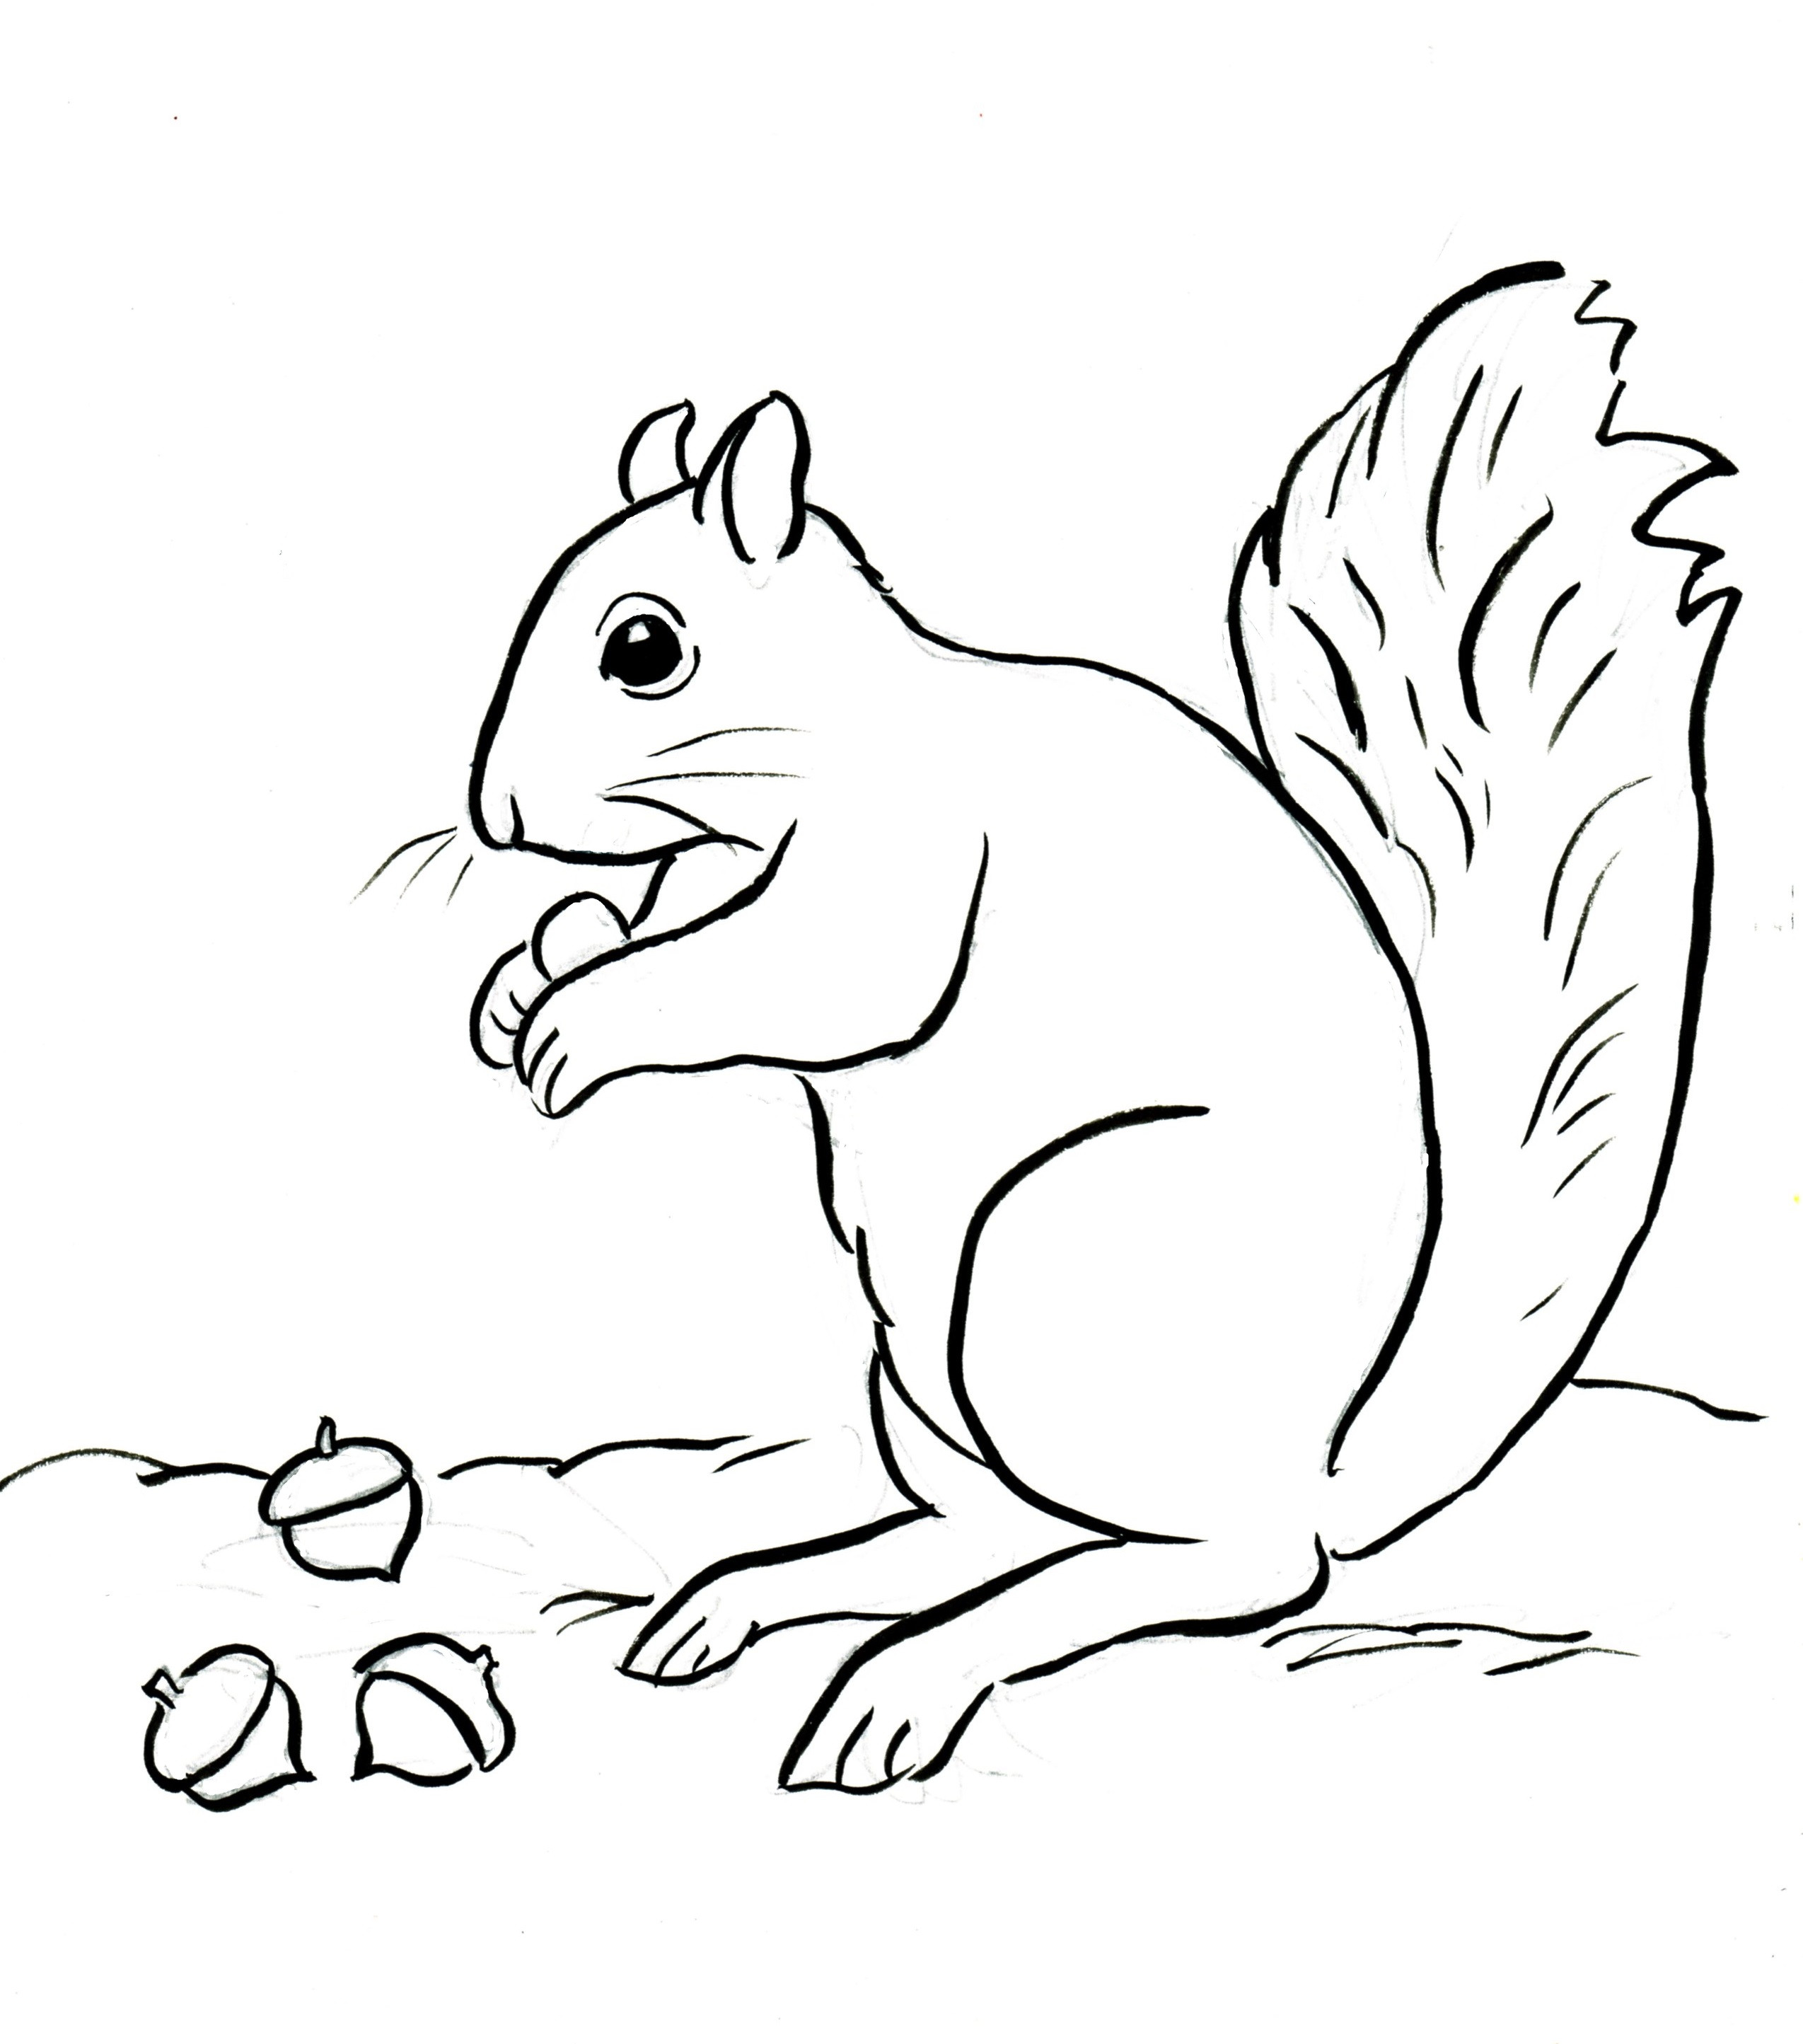 Squirrel Coloring Sheets For Kids
 Squirrel Coloring Page Samantha Bell